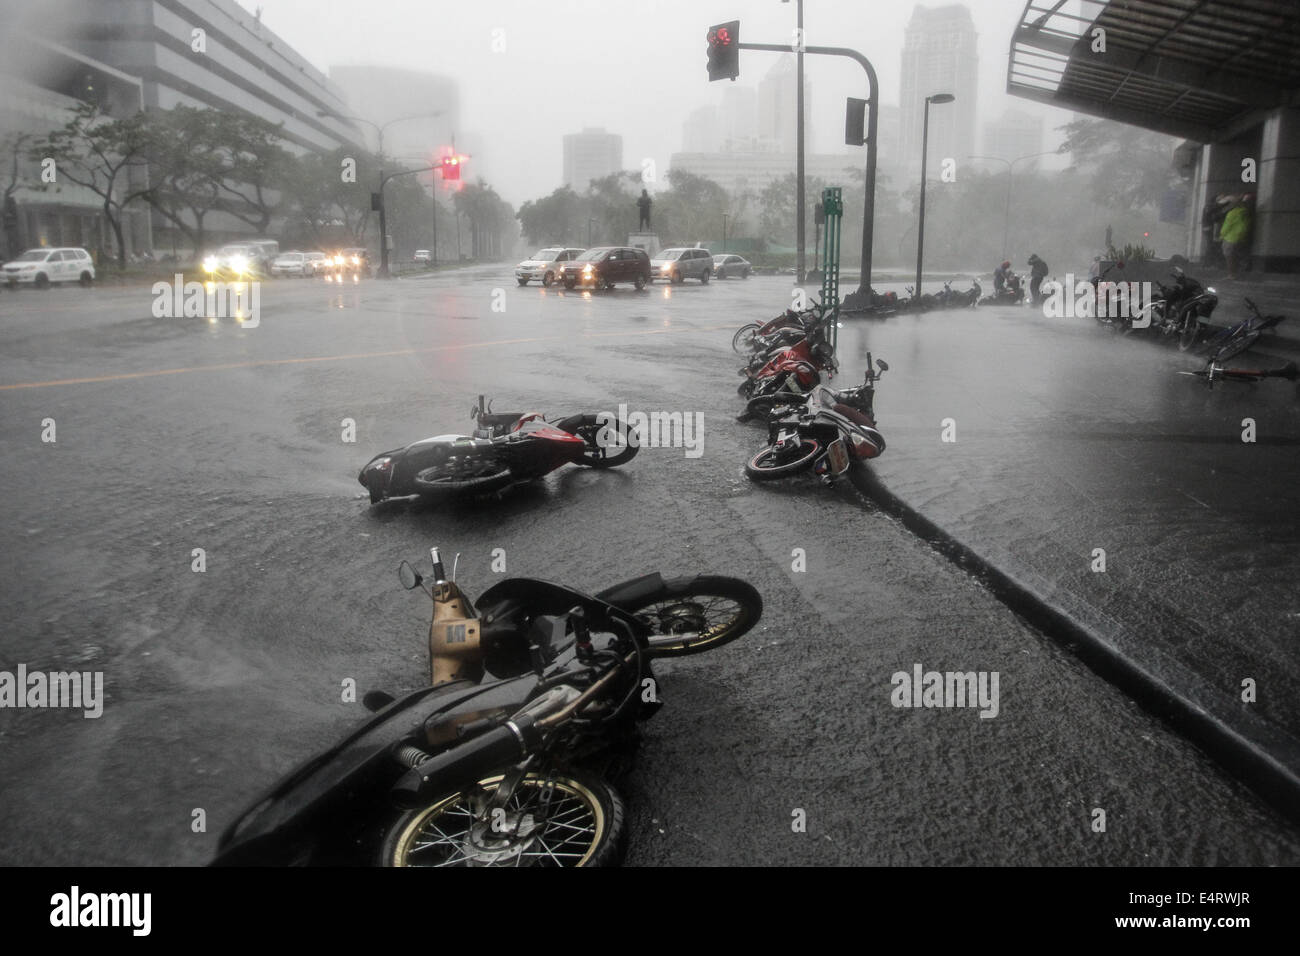 Manila, Philippines. 16th July, 2014. Motorcycles lie on the road toppled by strong winds as Typhoon Rammasun hit Metro Manila on July 16, 2014. Typhoon Rammasun (locally known as Glenda) had maximum sustained winds of 150 kph and gustiness of up to 185 kph when it hit Metro Manila. Across the country, about 400,000 people had fled their homes and sheltered in evacuation centers, according to the disaster management council. Credit:  ZUMA Press, Inc./Alamy Live News Stock Photo